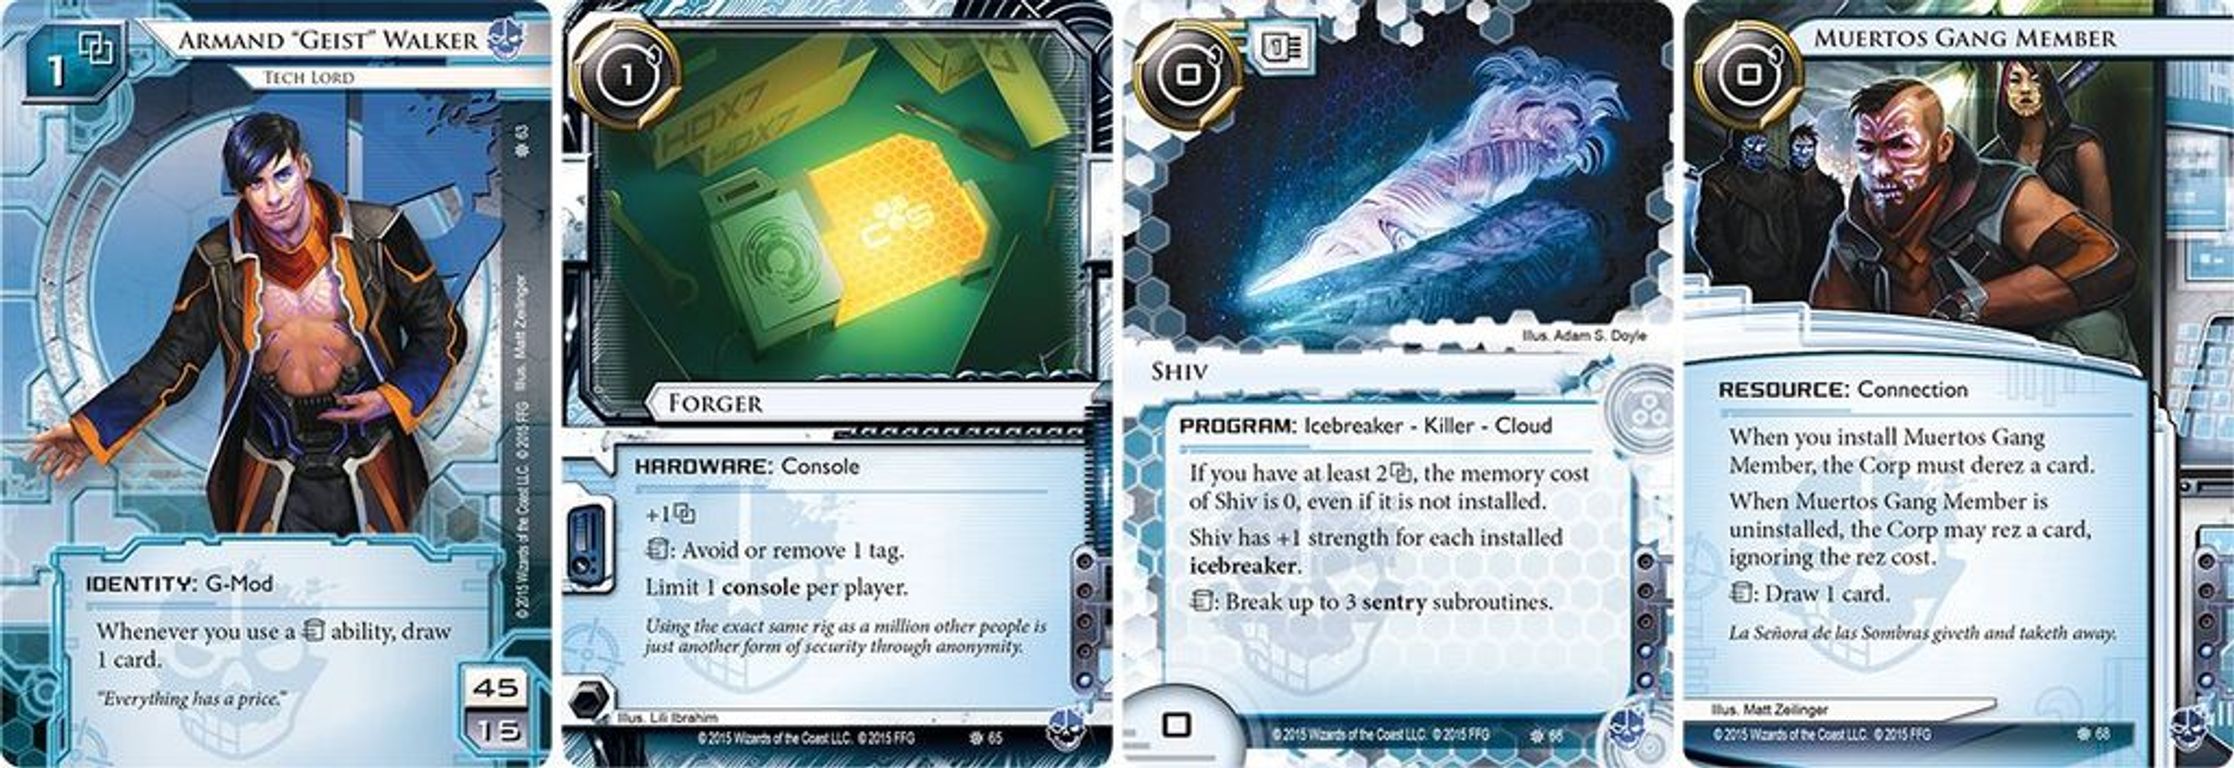 Android: Netrunner - The Underway cards